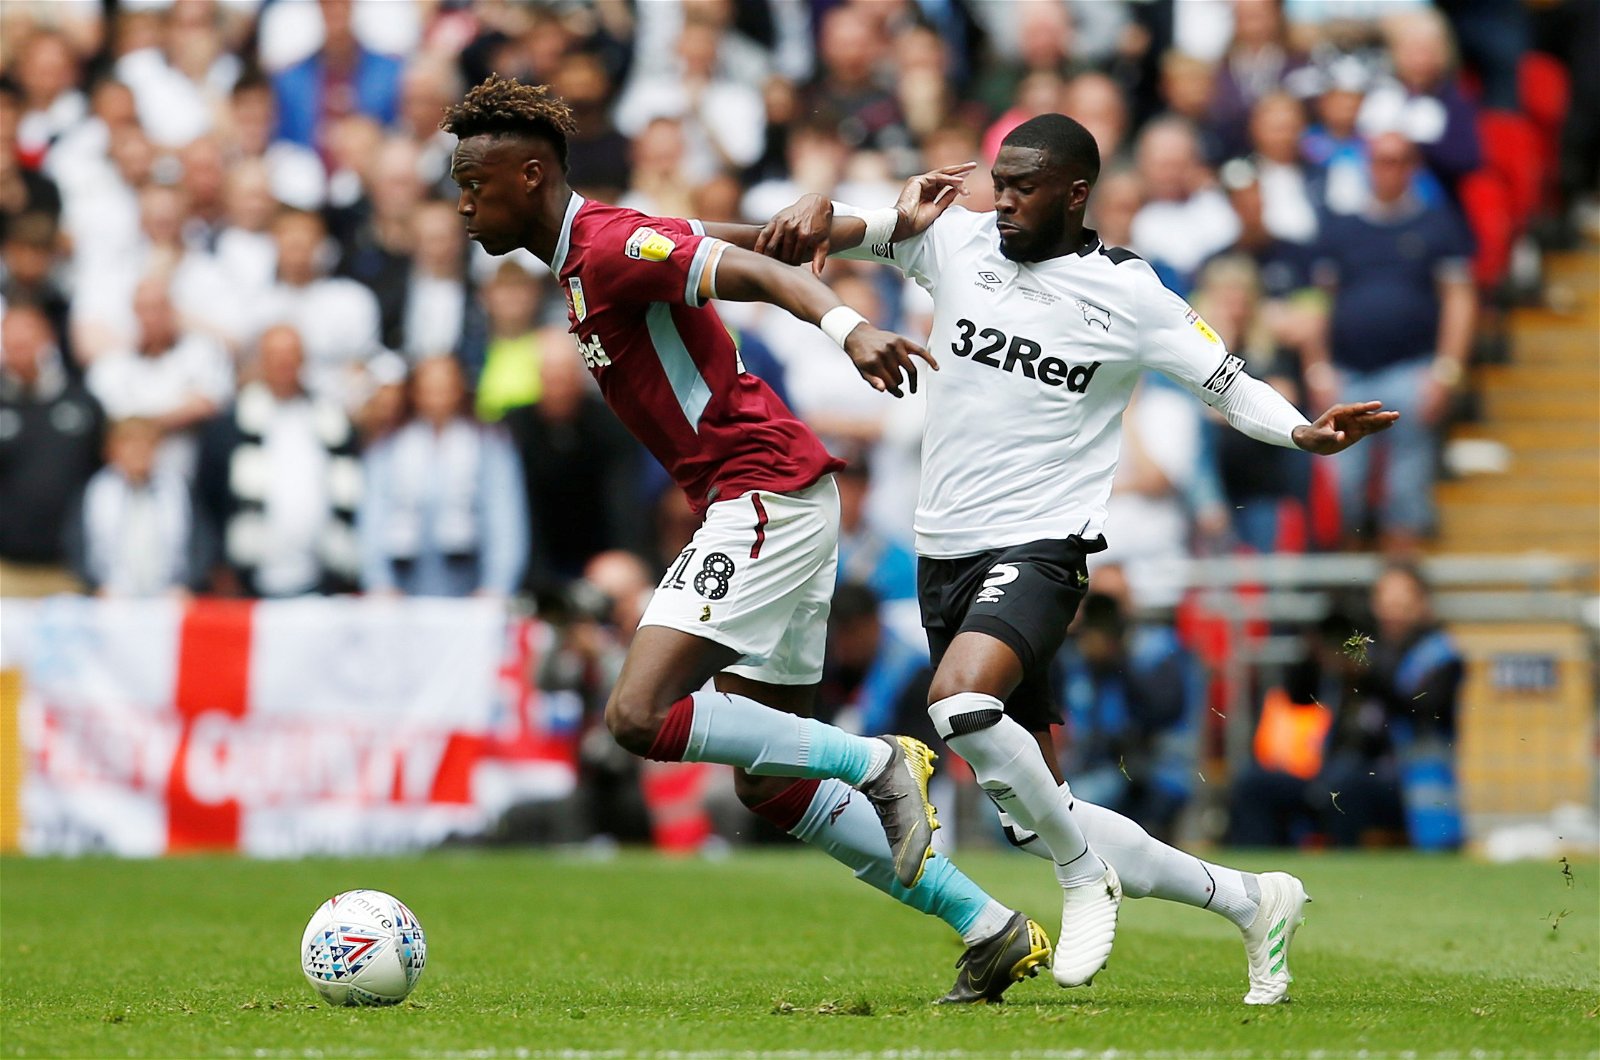 Ian Holloway feels young striker can be a regular under Chelsea